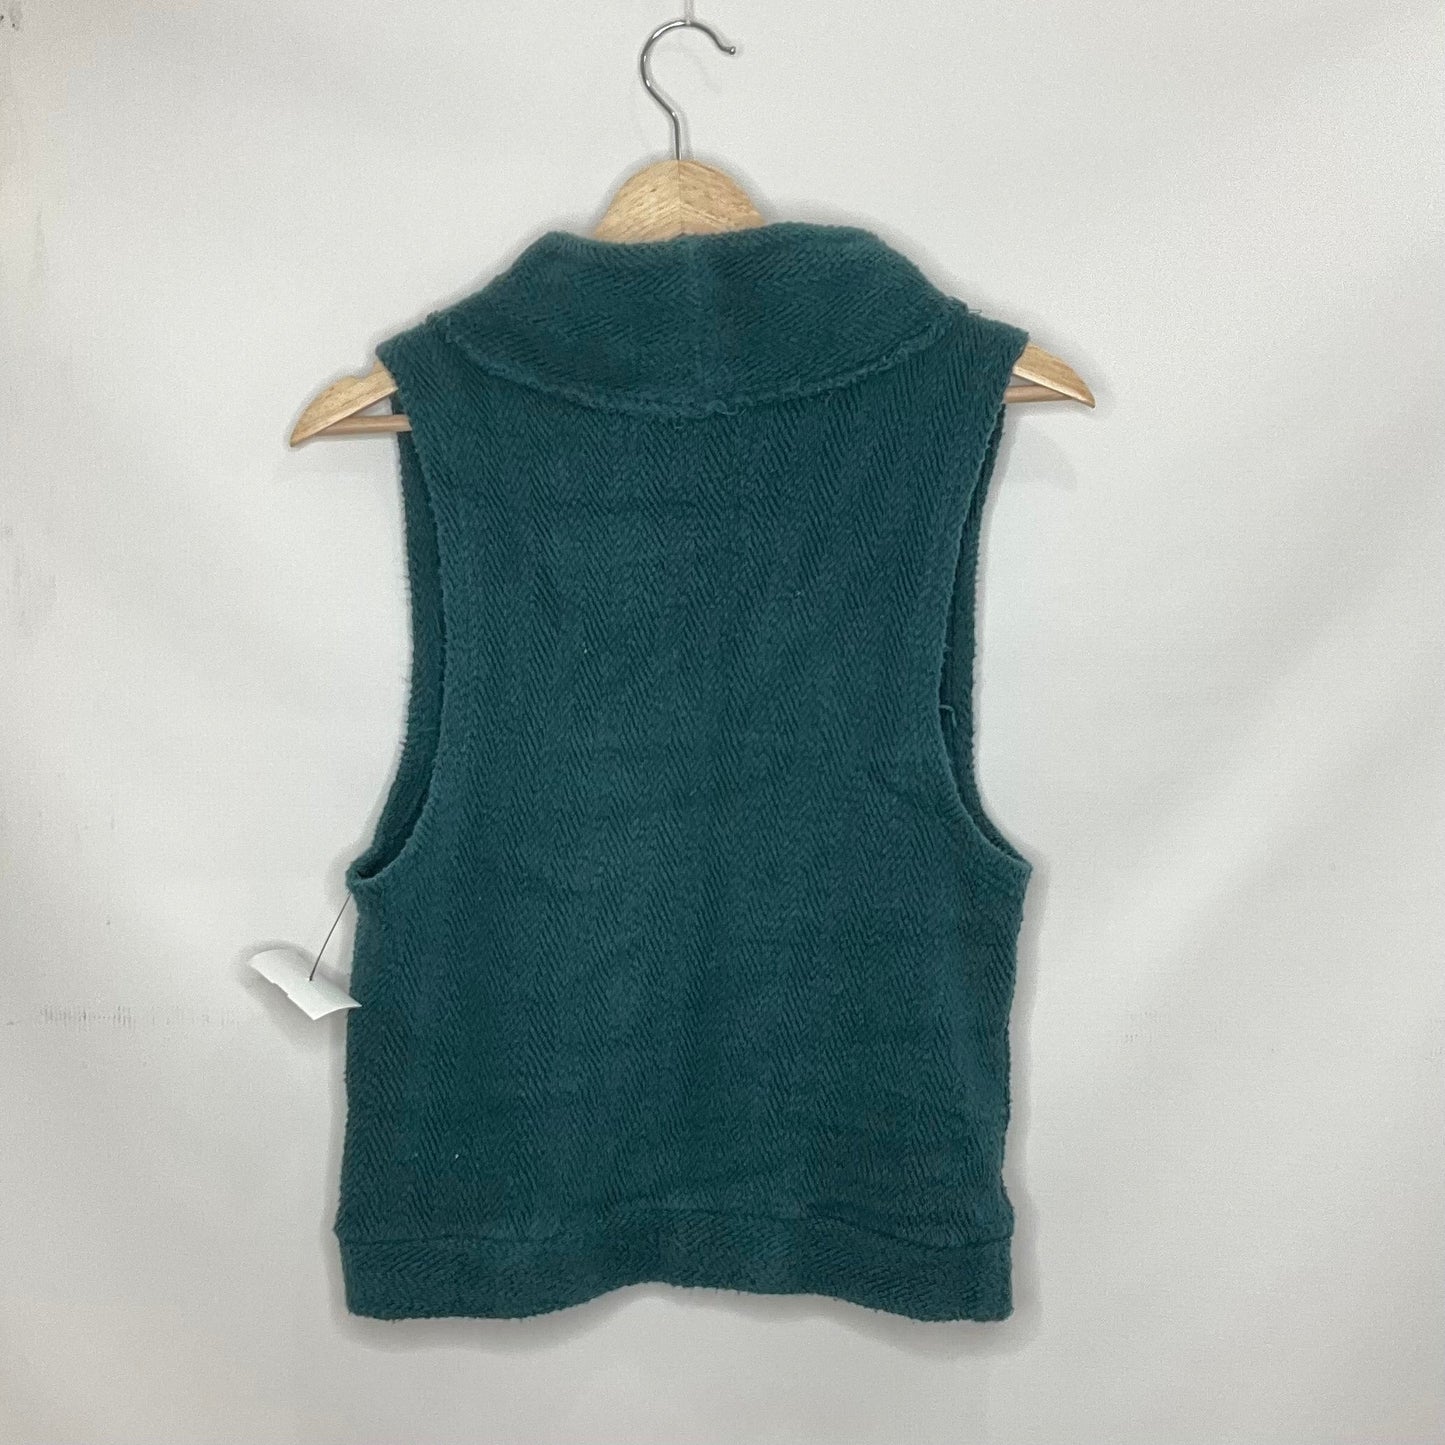 Teal Top Sleeveless Free People, Size M